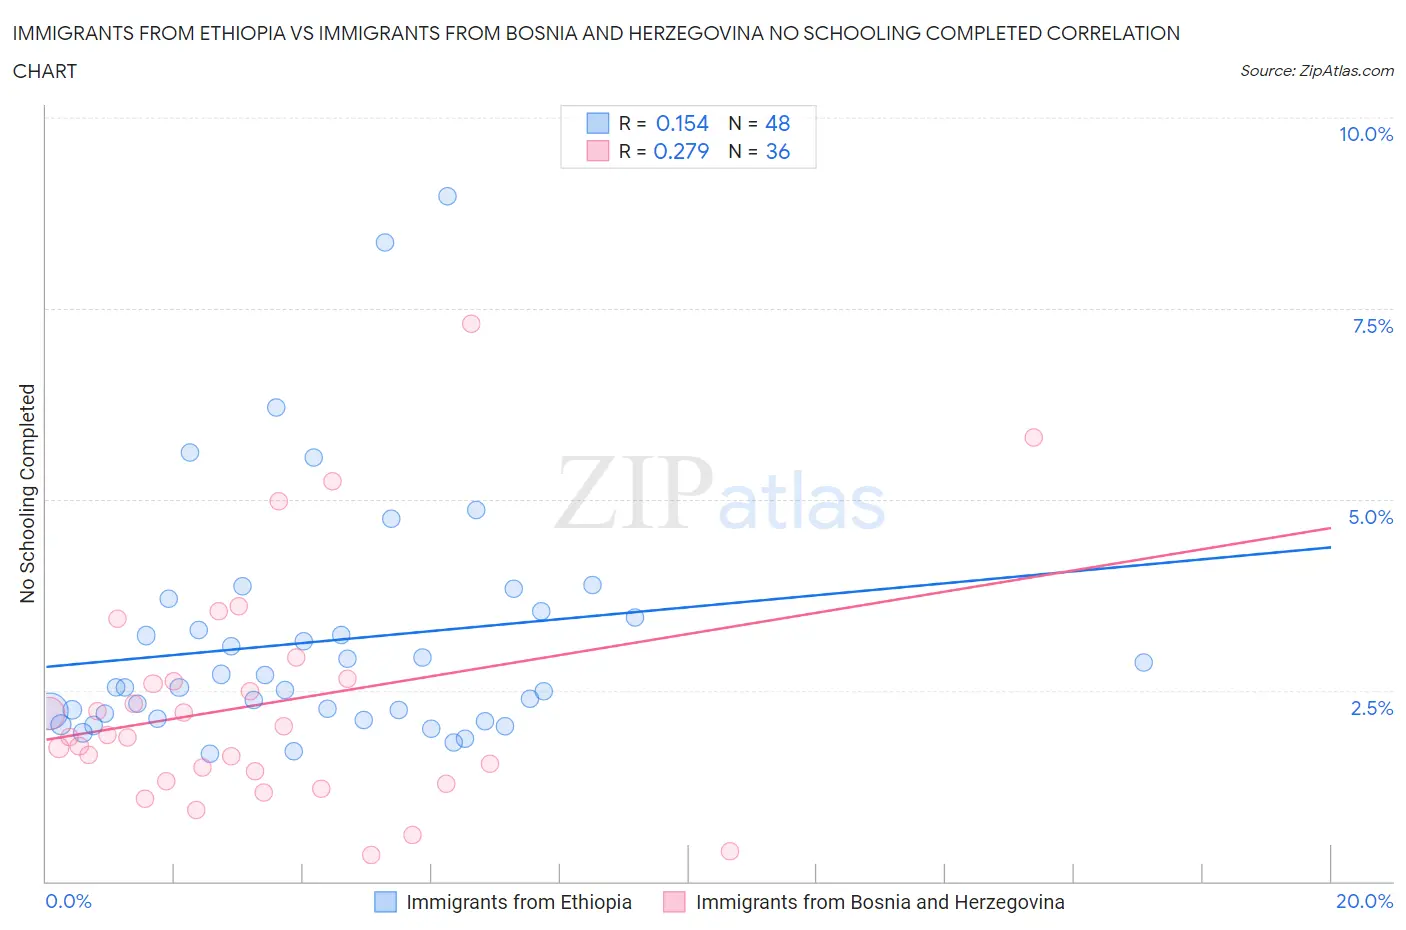 Immigrants from Ethiopia vs Immigrants from Bosnia and Herzegovina No Schooling Completed